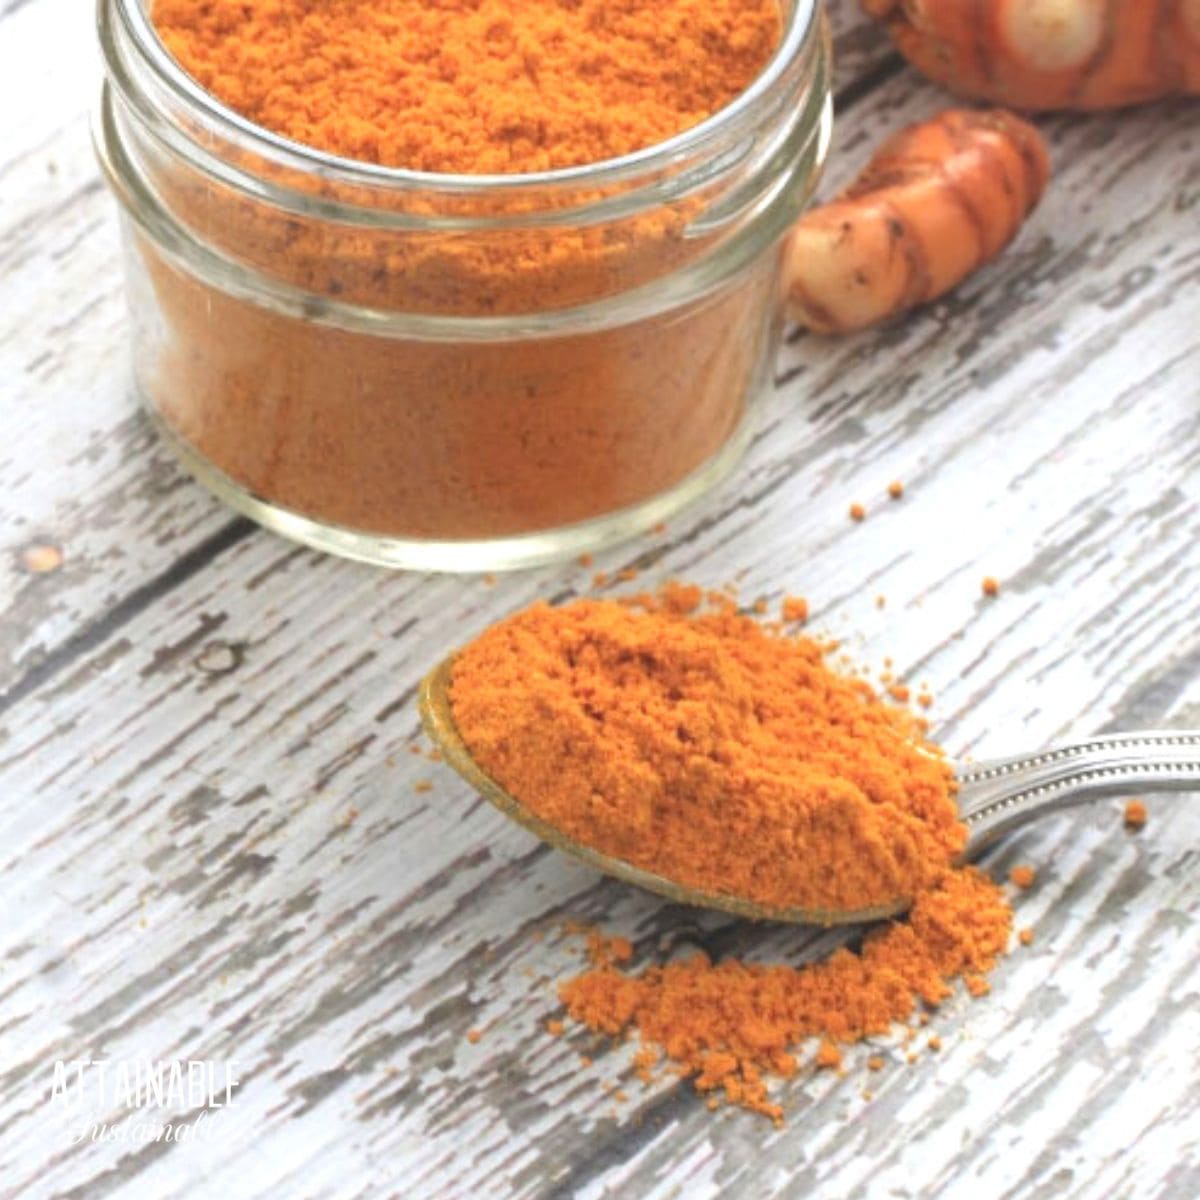 spoonful of orange turmeric powder, with a small jar full behind.